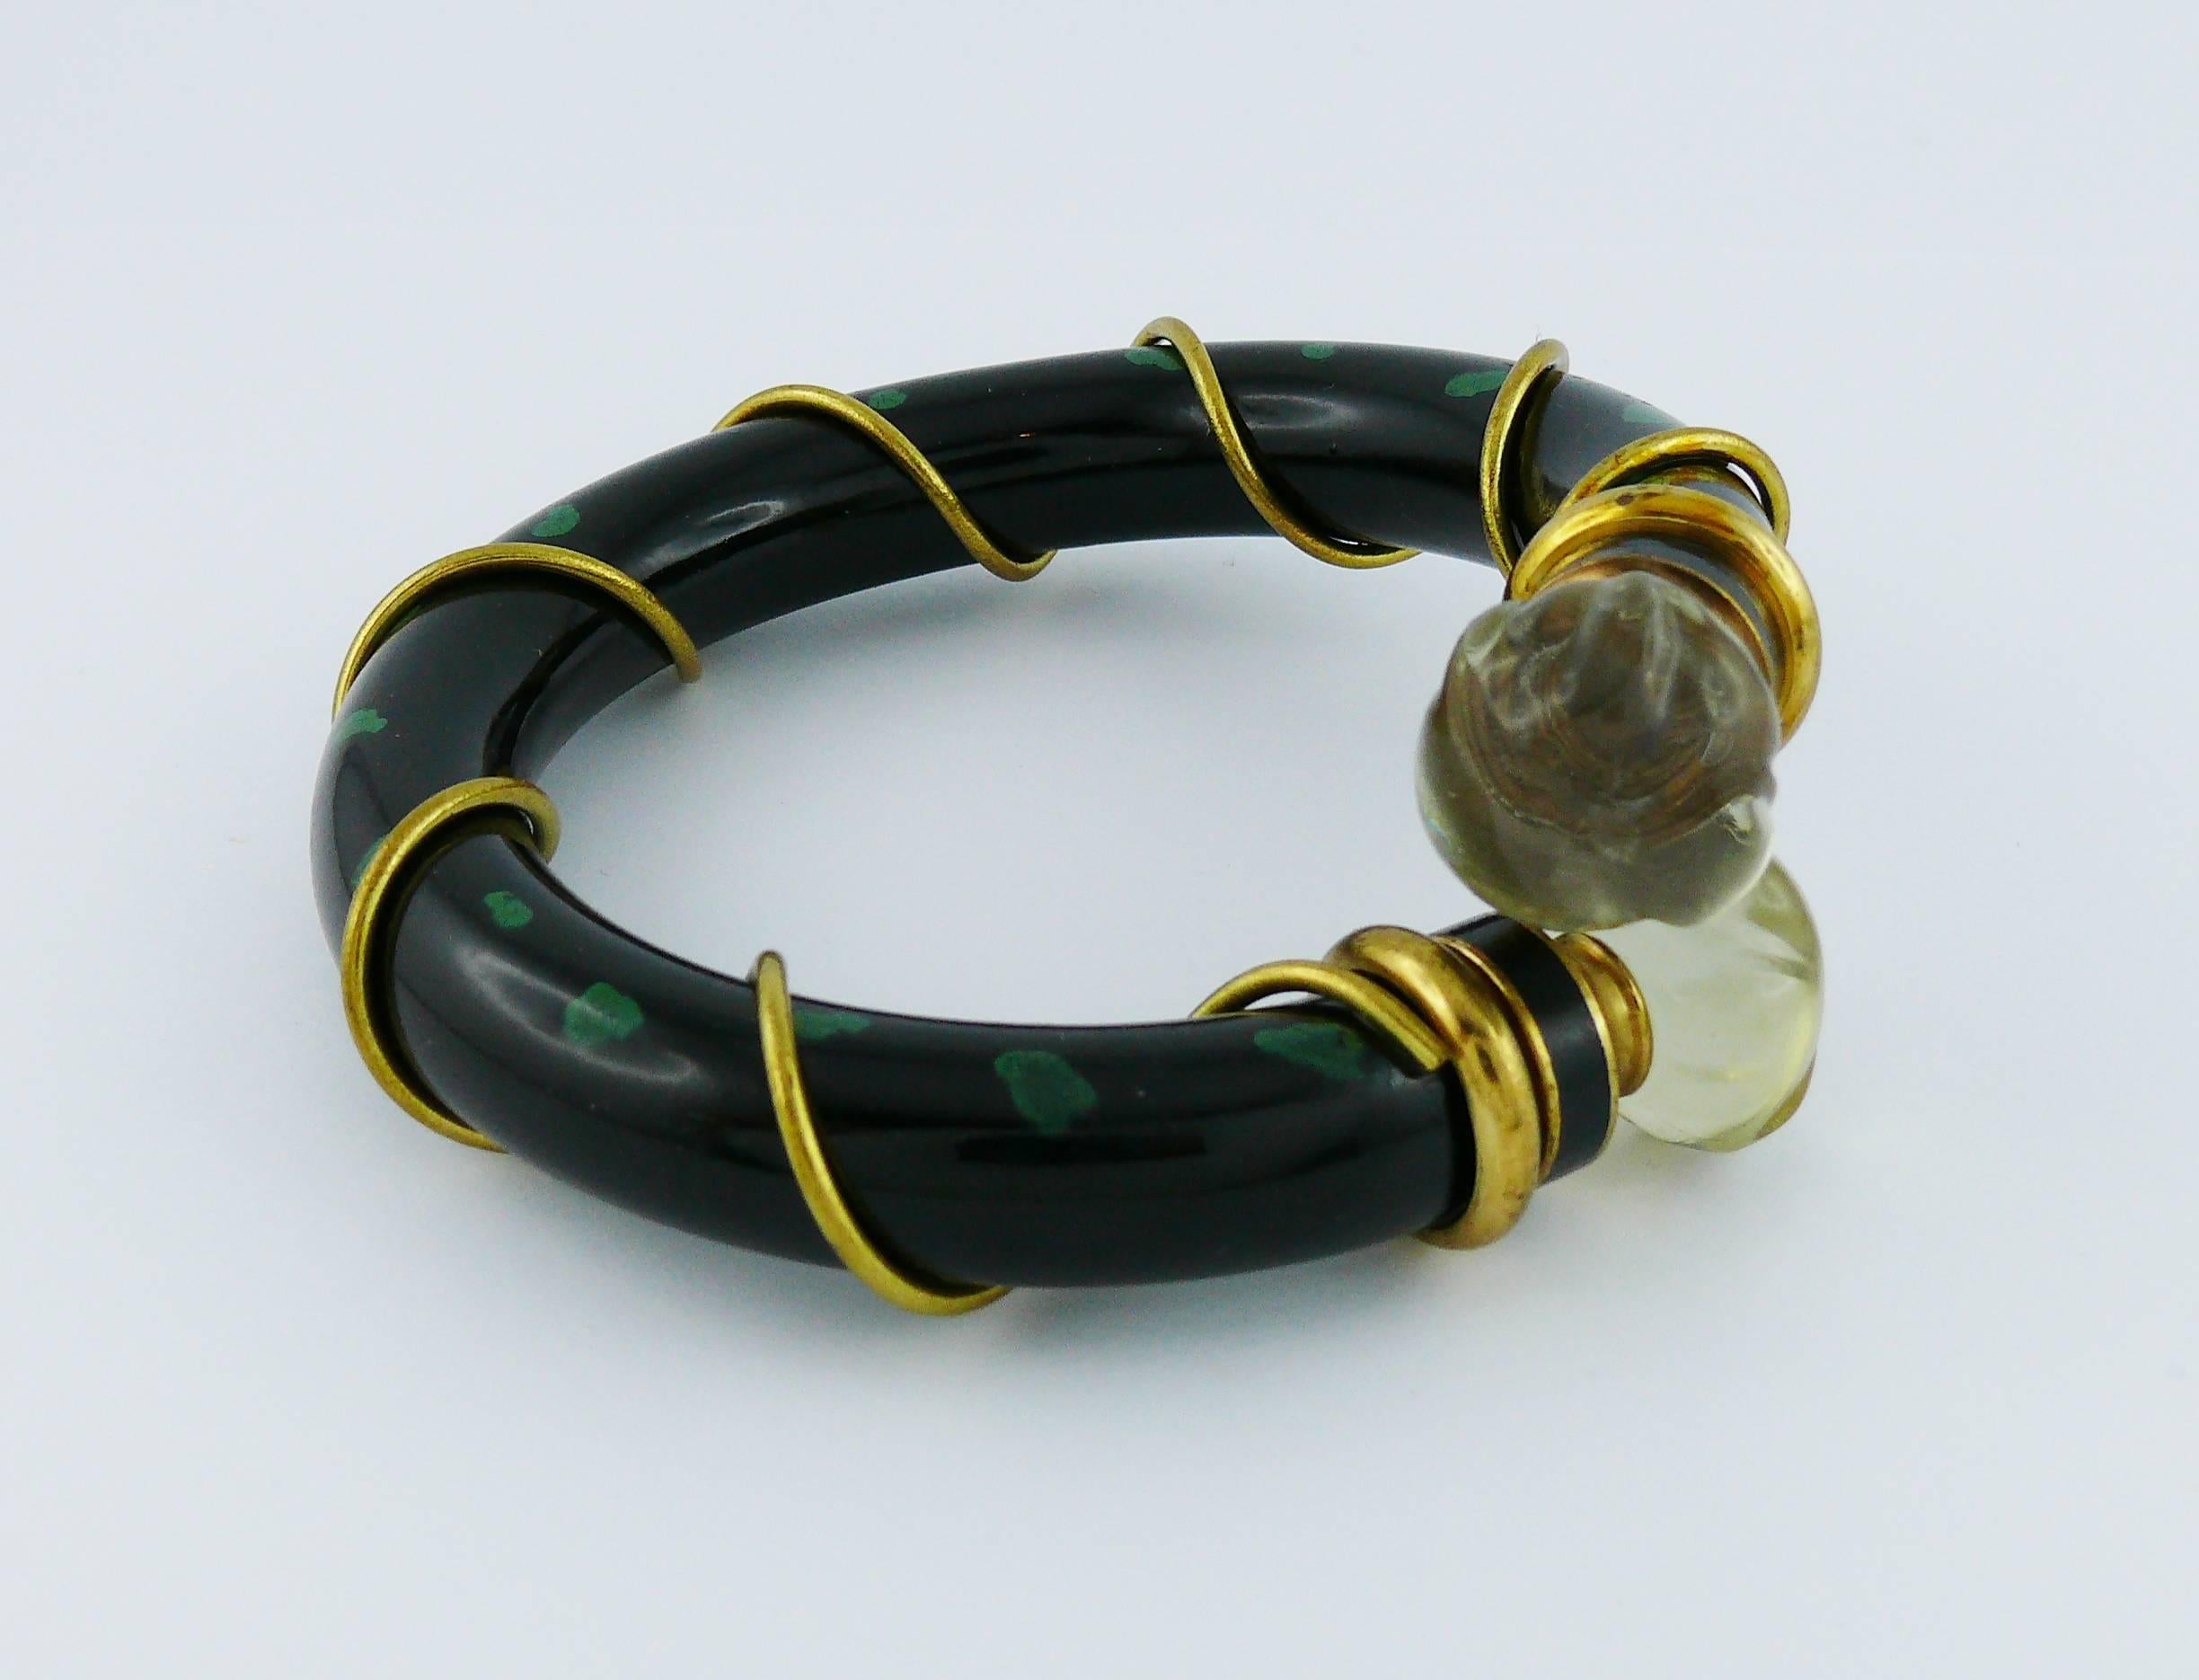 CHRISTIAN DIOR Parfums vintage POISON bracelet.

This bracelet features :
- Refillable tubular structure in black with green spots.
- Gold toned wired hardware.
- Clear resin taps (one tap unscrews).

Marked POISON CHRISTIAN DIOR Paris.

Indicative